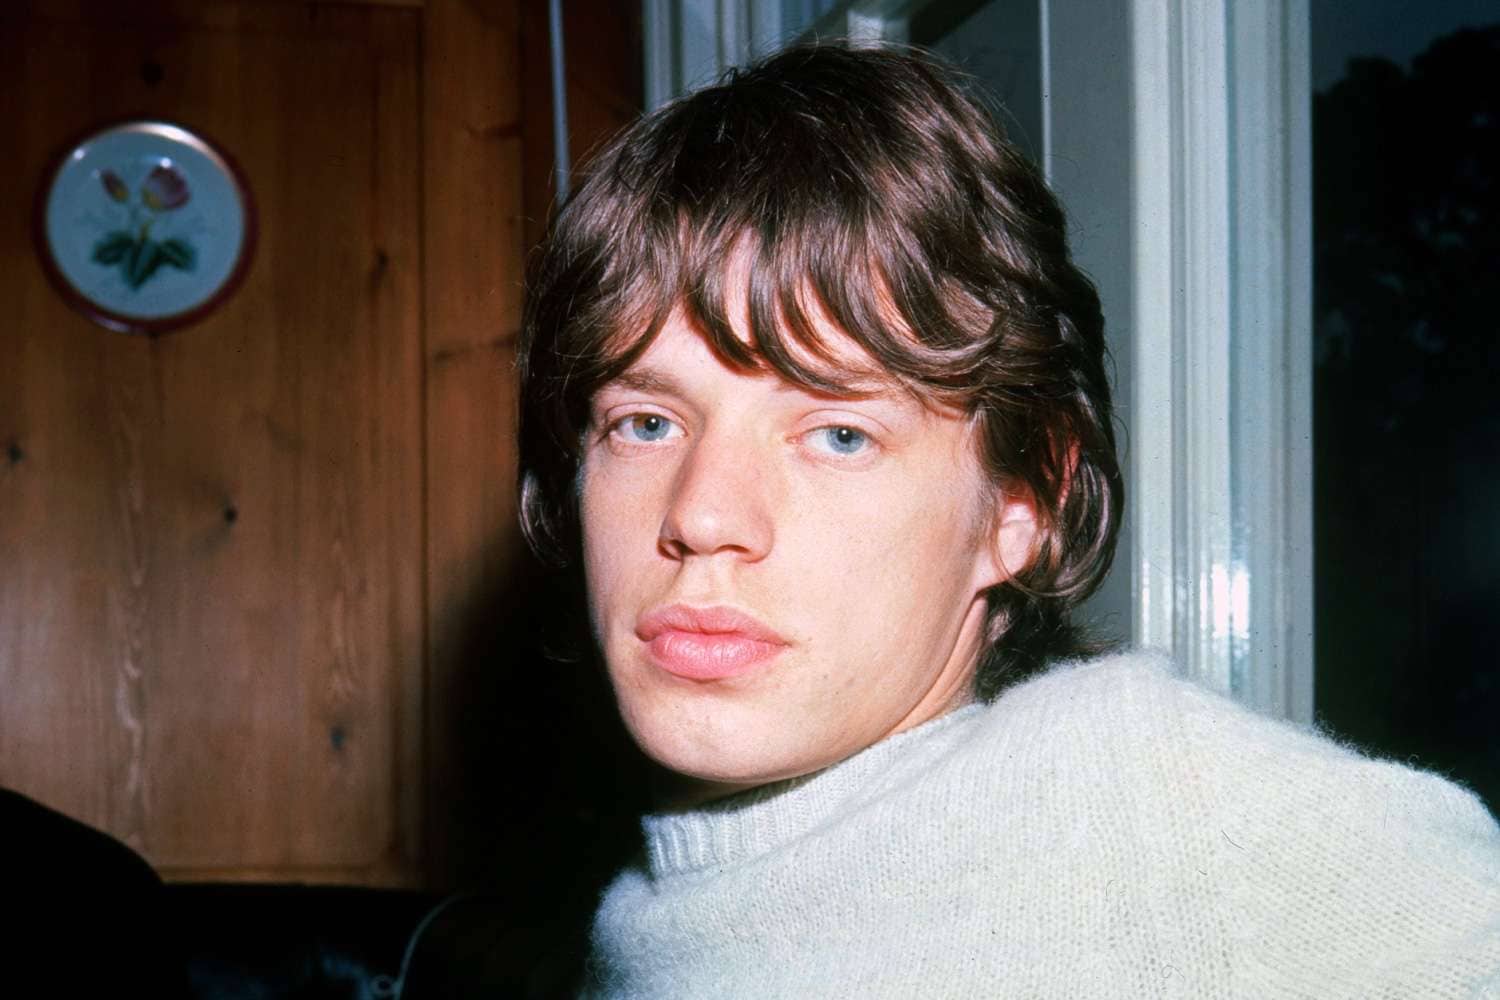 Mick Jagger Net Worth How Much Does The English Singer Earn? (Updated